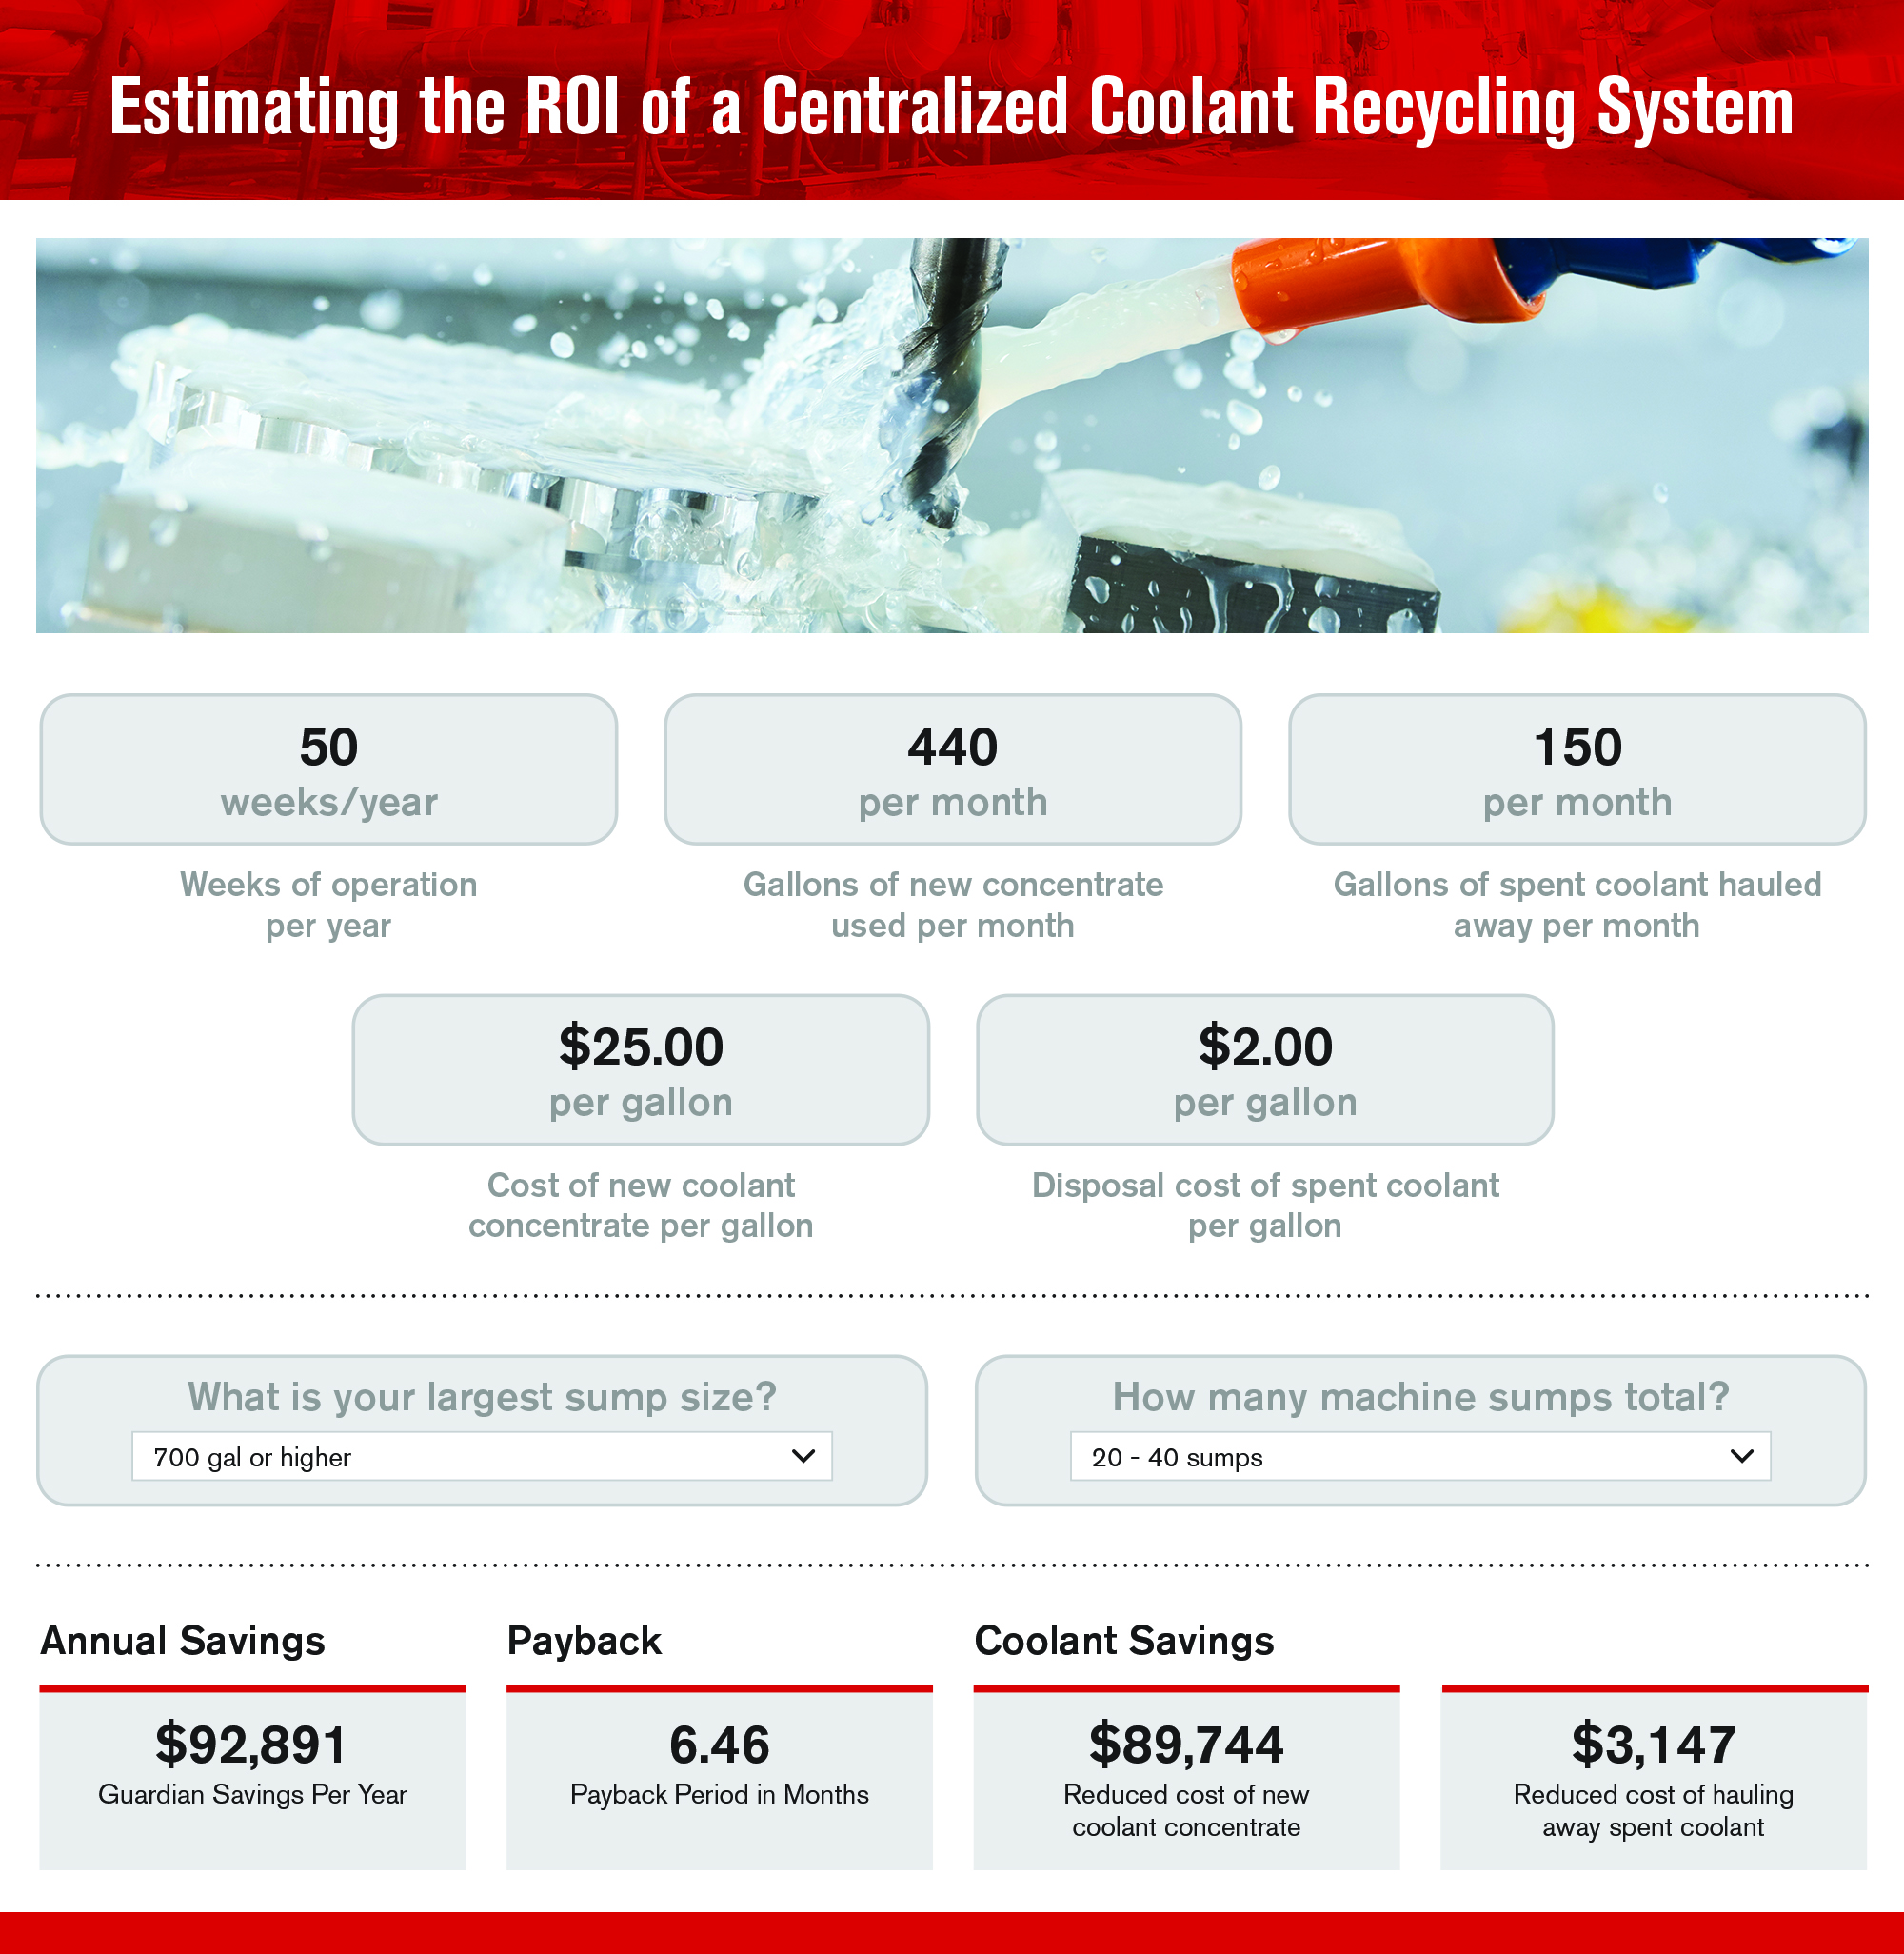 Investing in automated systems that are projected to provide a quick return on investment, such as this ROI estimate for a PRAB Guardian Coolant Recycling System, is a way to improve operations while minimizing cash flow disruptions. 